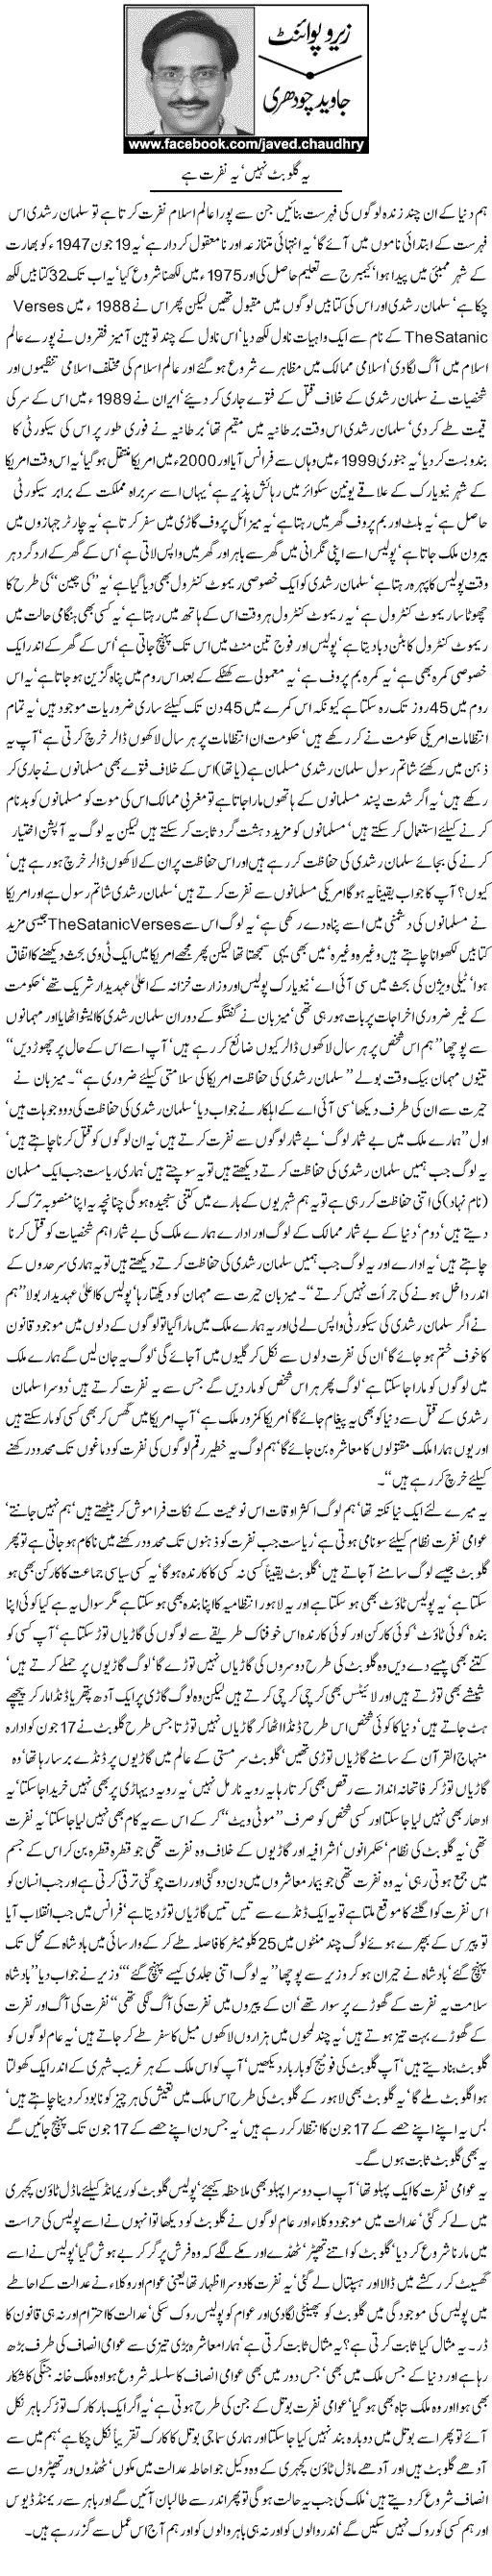 Print Media Coverage Daily Express - Javed Ch